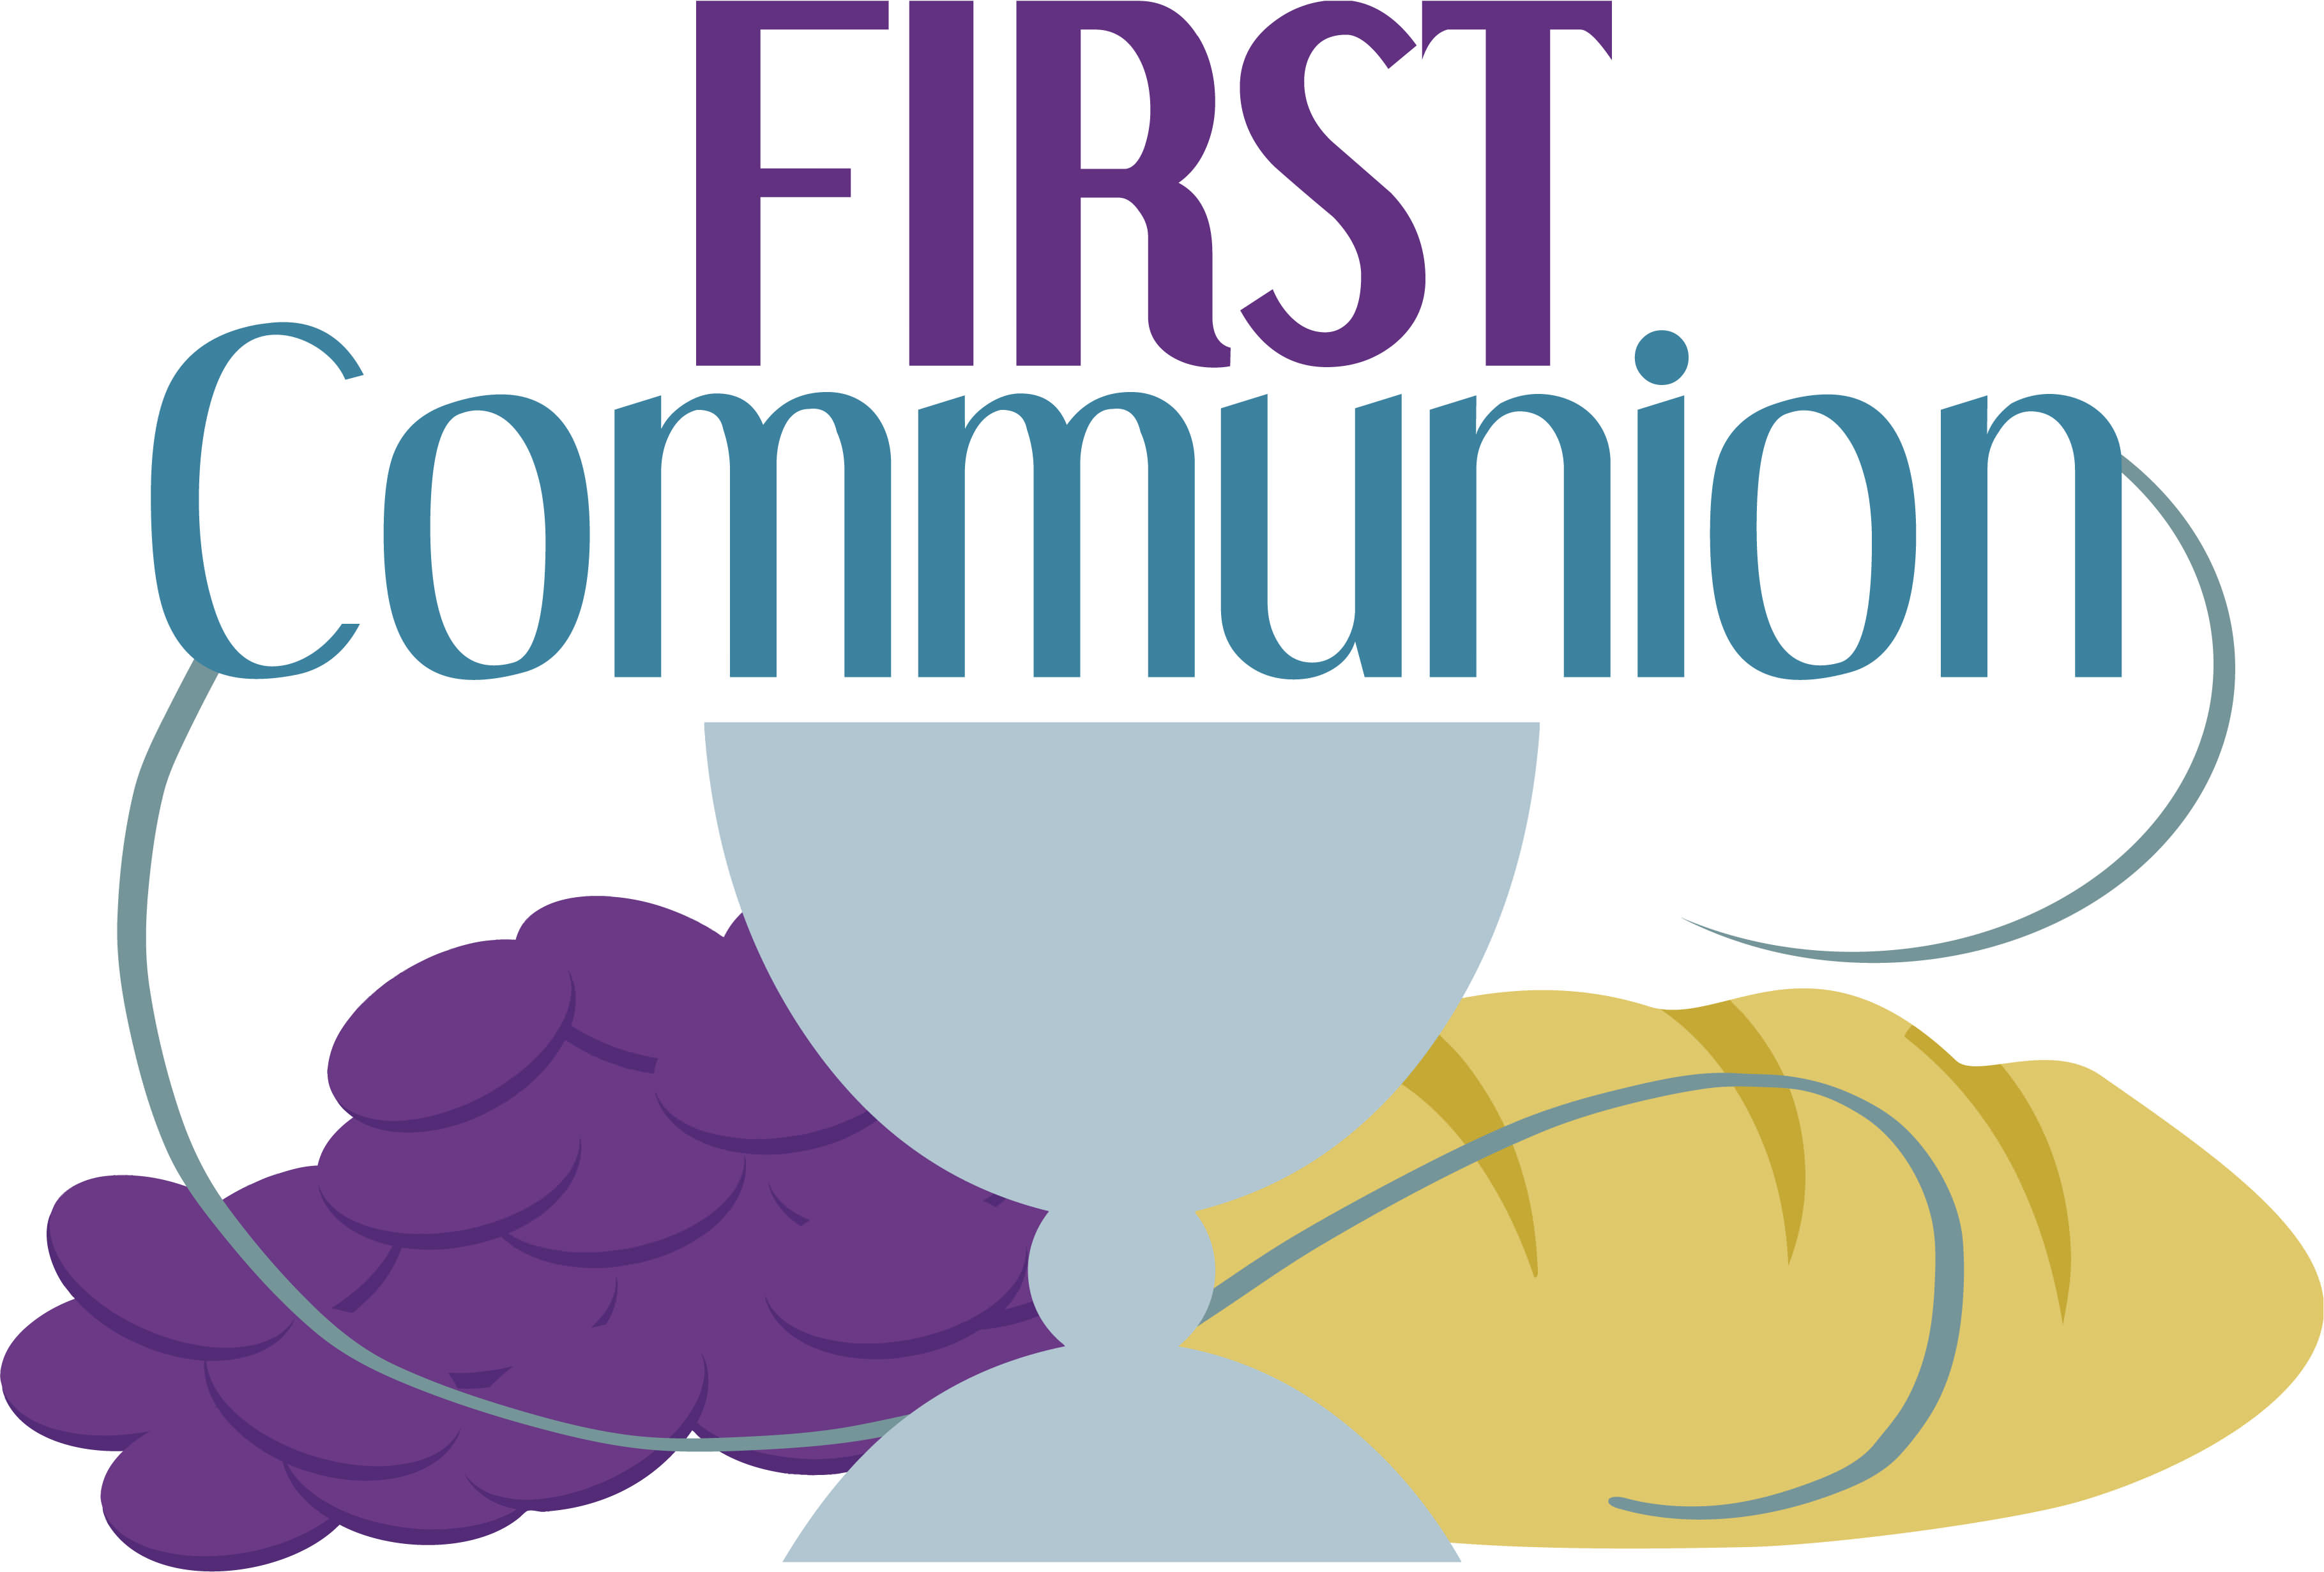 FIRST COMMUNION CLASSES - Reformation Lutheran Church